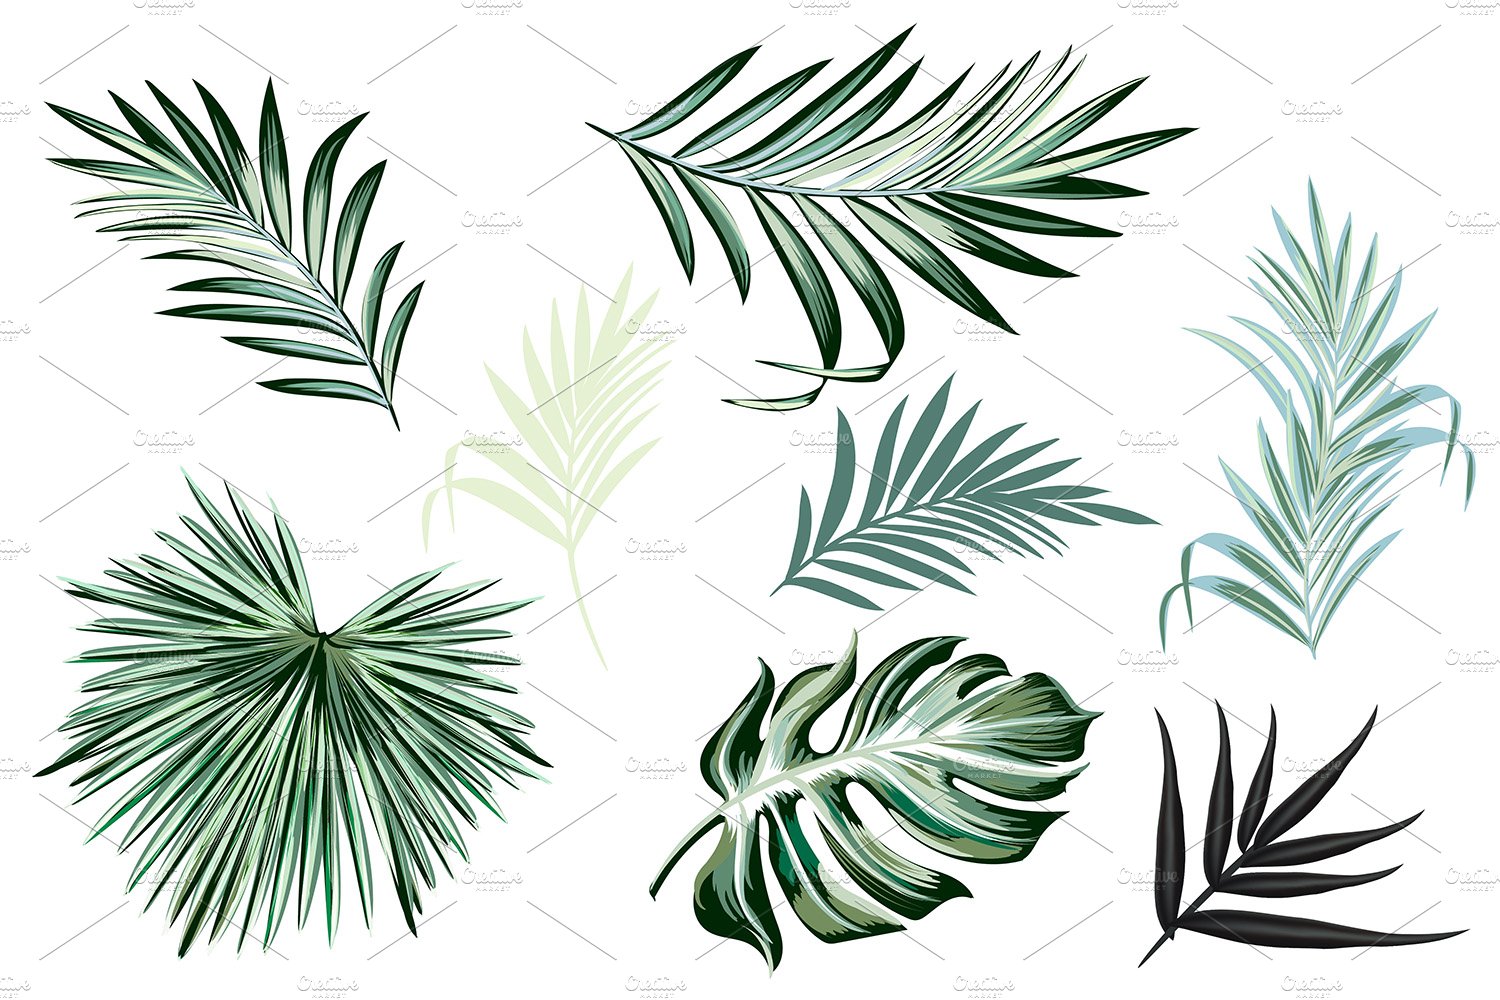 Diverse of palms in different styles.